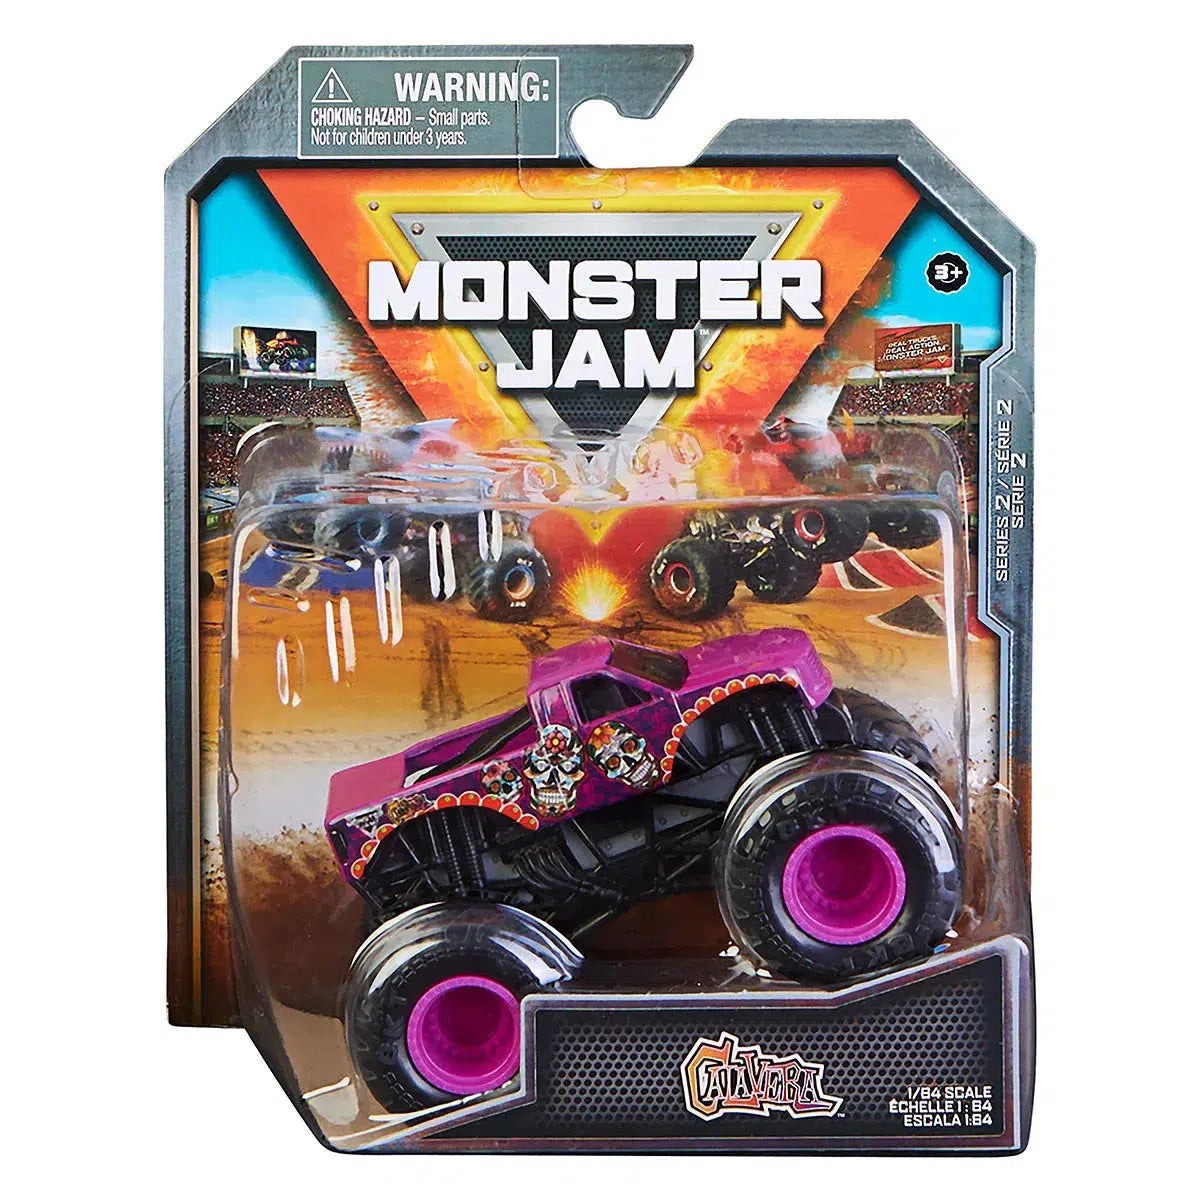 Spin Master-Monster Jam 1:64 Scale Die-Cast Monster Truck Series 2-20137354-Calavera-Legacy Toys